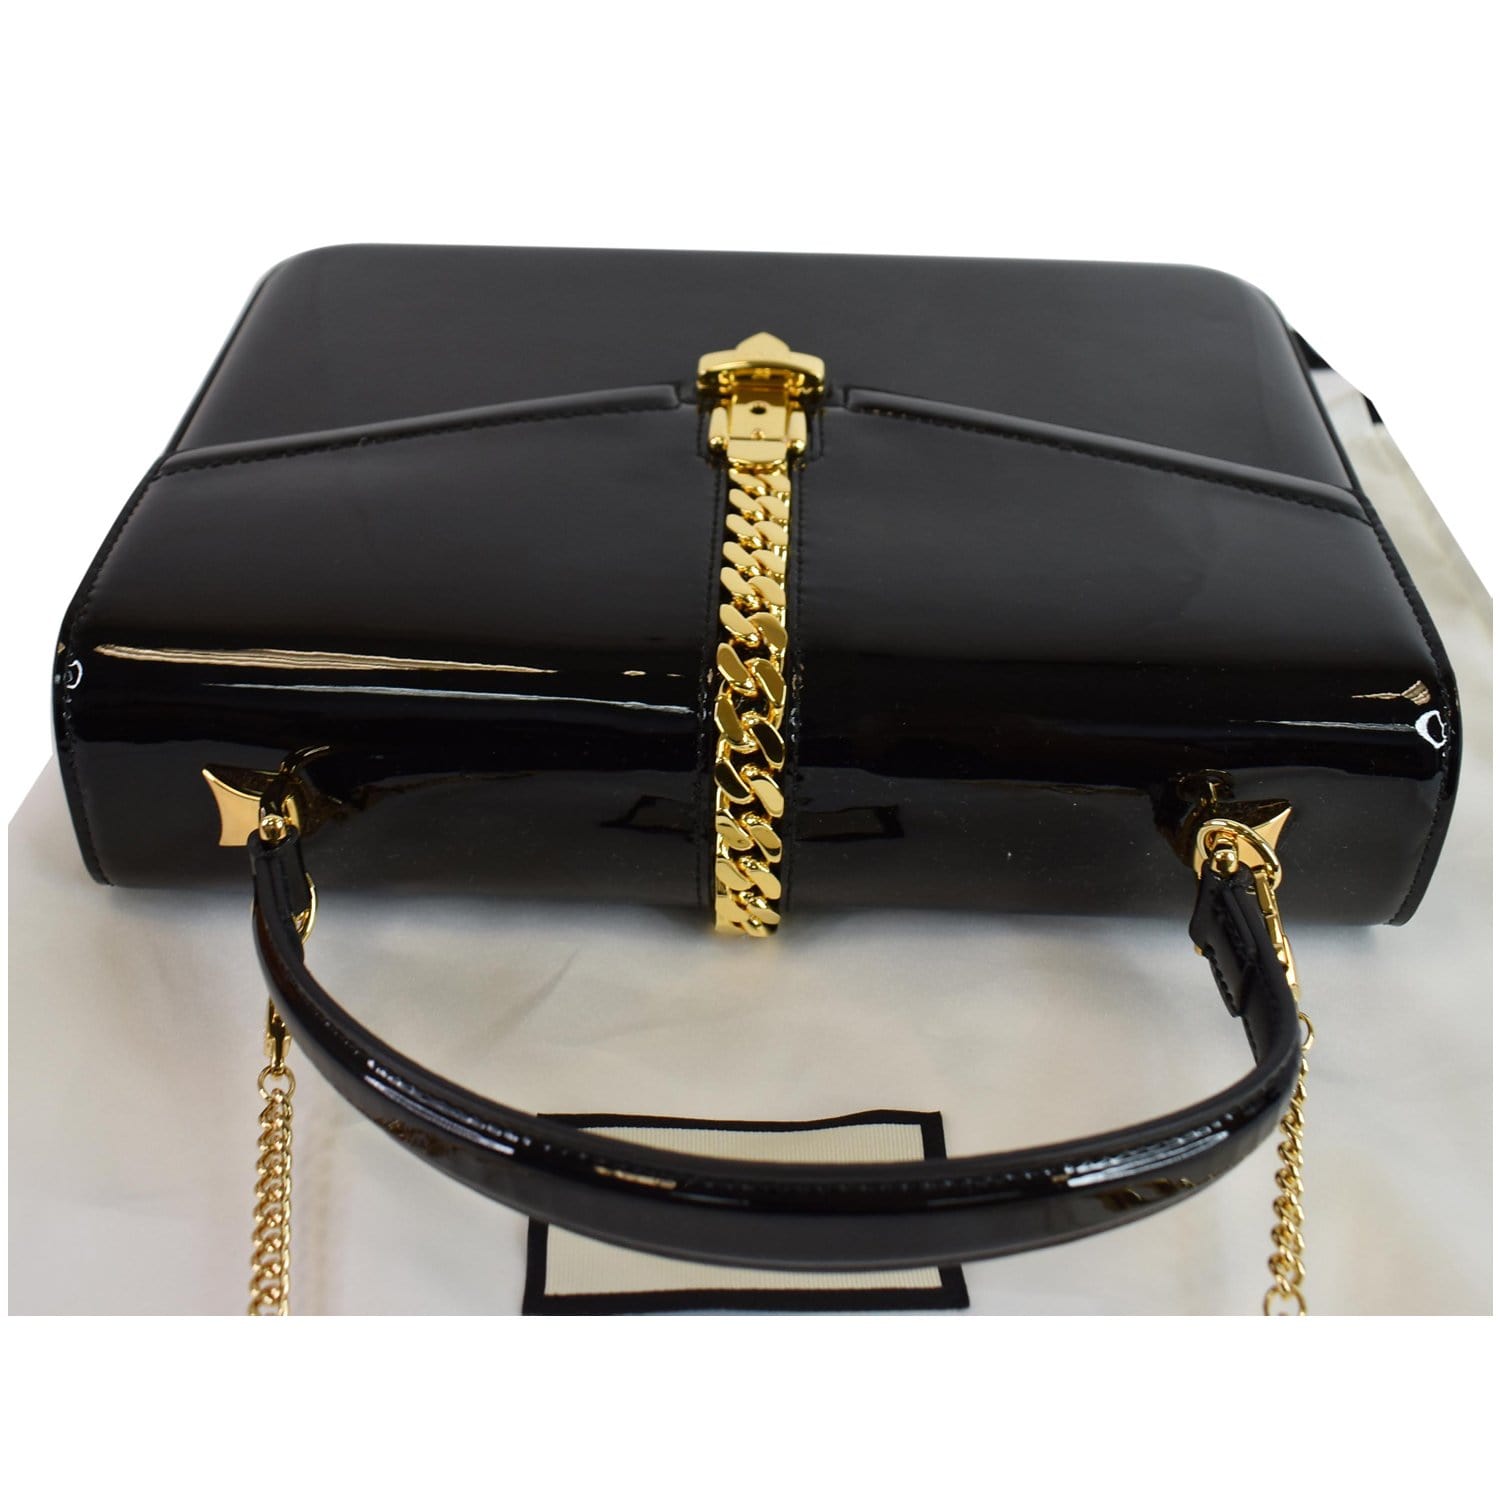 GUCCI Bag by Tom Ford Black Patent Leather document case bag